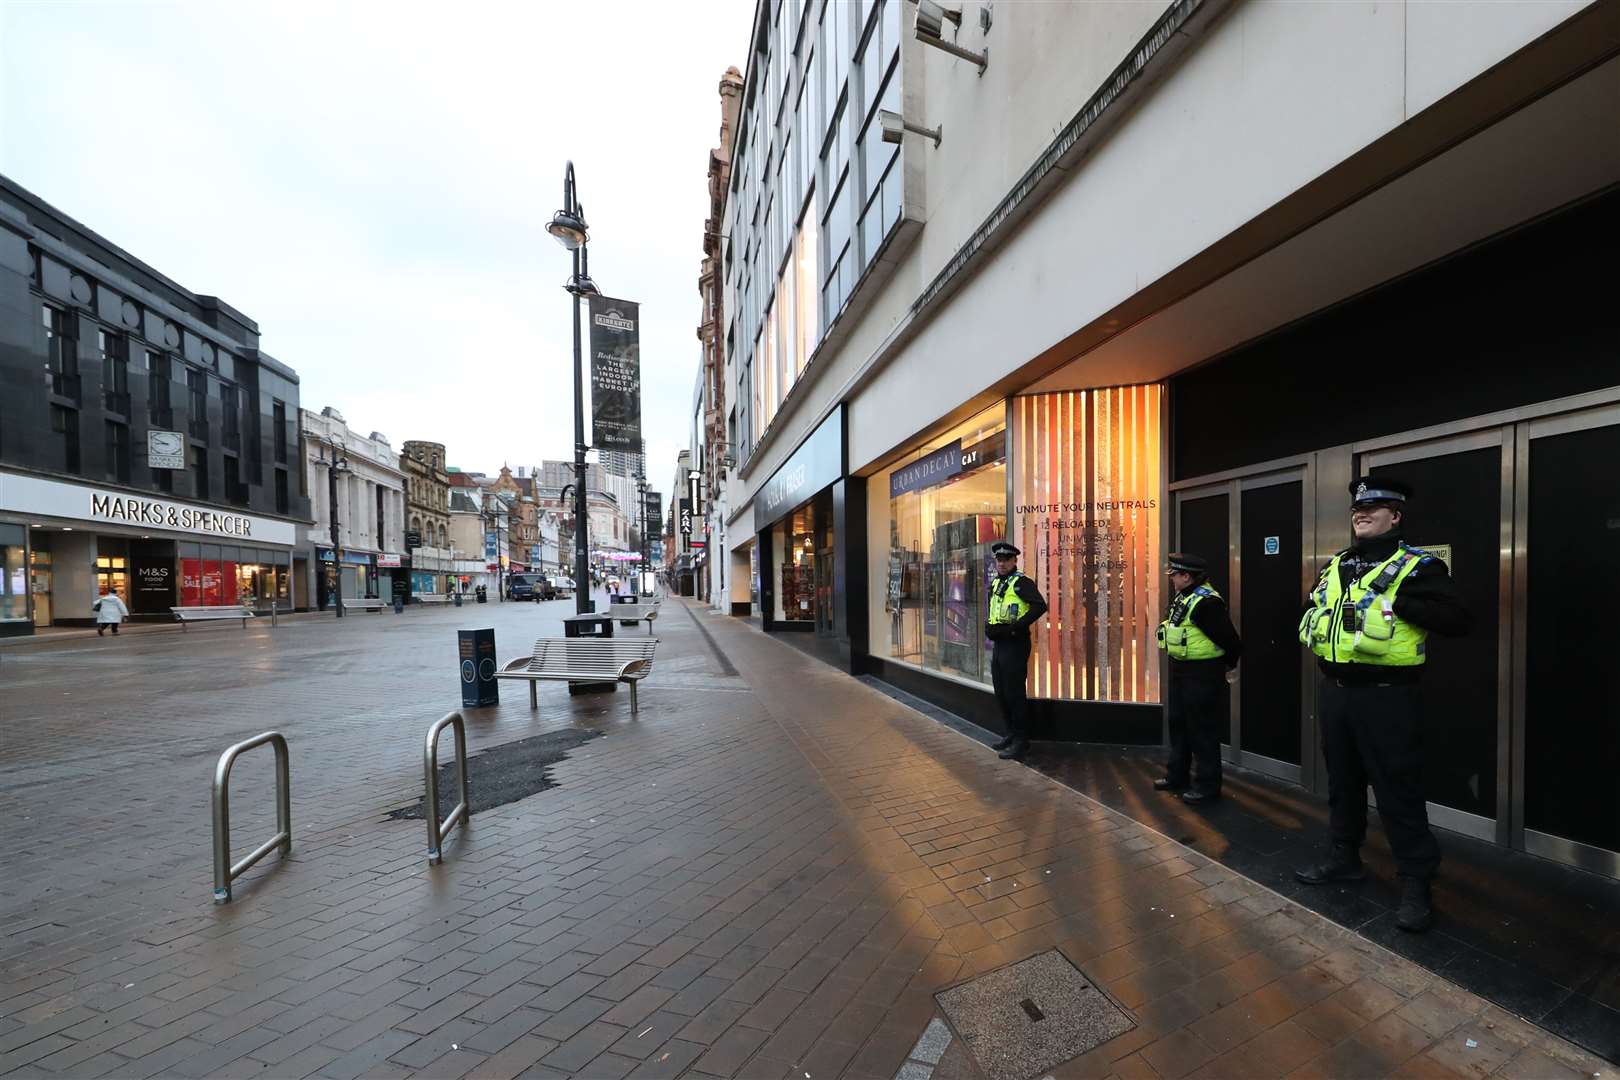 Police community support officers were the biggest presence along Briggate in Leeds city centre (Danny Lawson/PA)